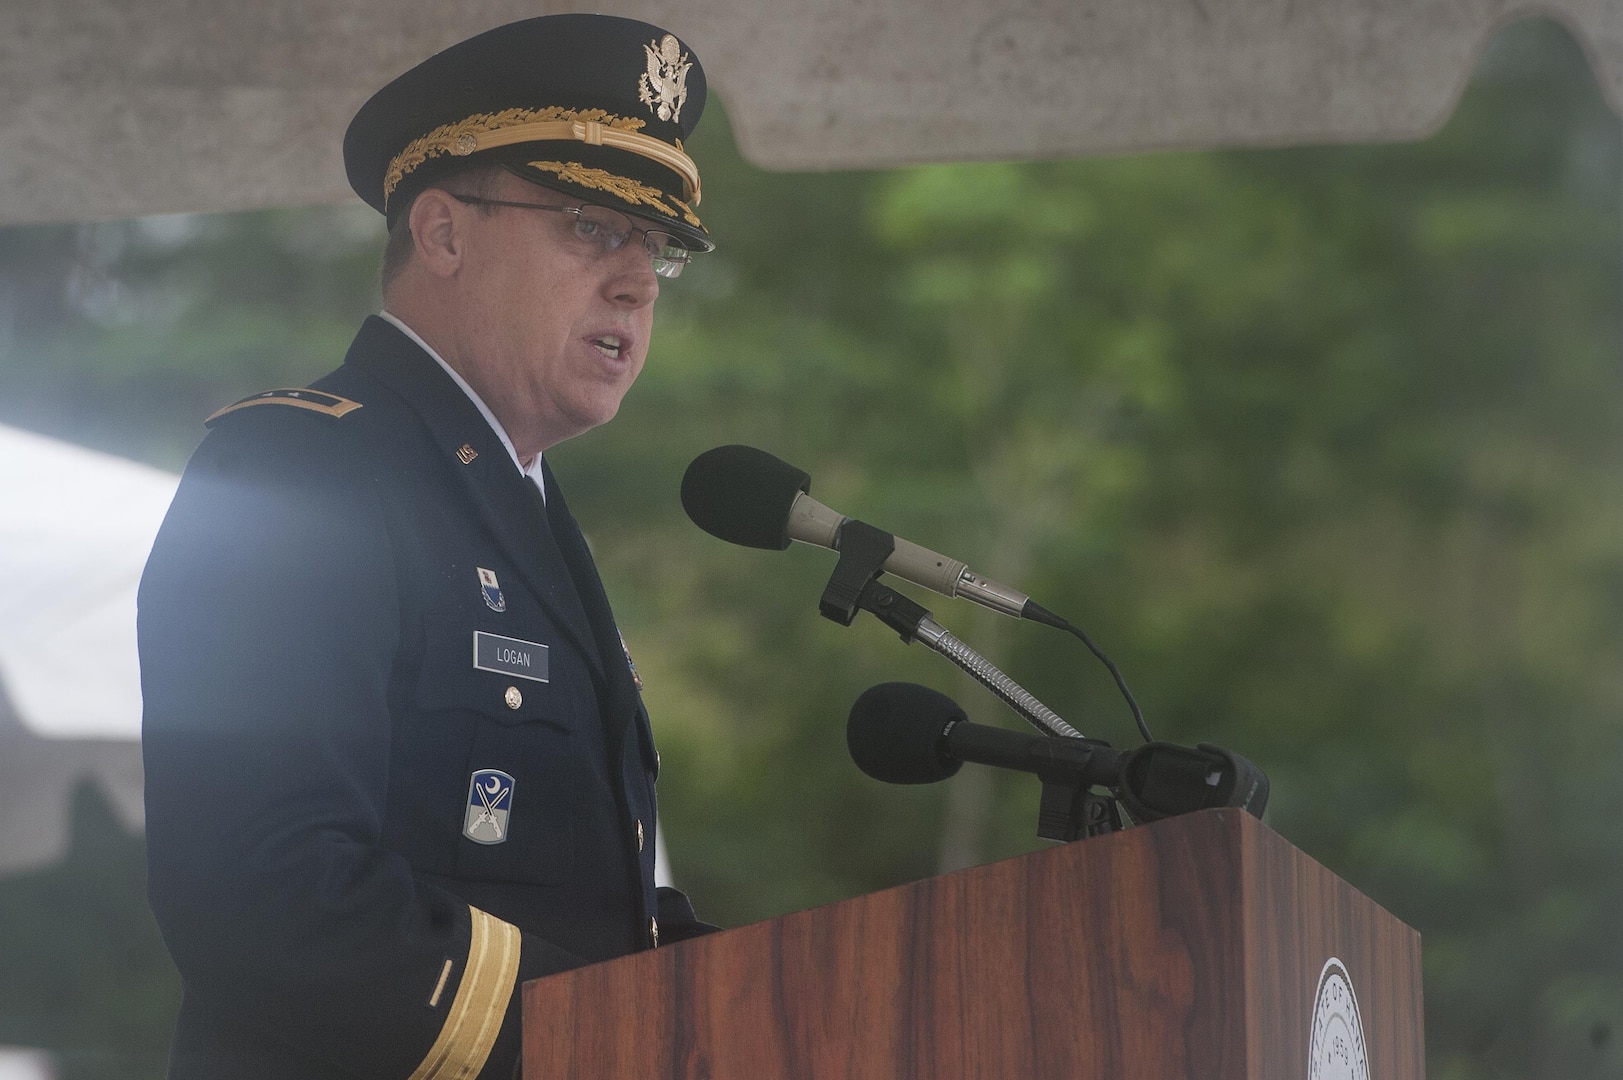 U.S. Army Maj. Gen. Arthur J. Logan, the adjutant general of the state of Hawaii, provides welcoming remarks during the 2015 Governor’s Veterans Day Ceremony at the Hawaii State Veterans Cemetery Nov. 11, in Kaneohe, Hawaii. The ceremony included music provided by the 111th Army Band, a military wreath placing conducted by U.S. Pacific Command leadership and a rifle salute performed by the Hawaii Air National Guard Honor Guard team. (U.S. Air Force photo by Staff Sgt. Christopher Hubenthal)